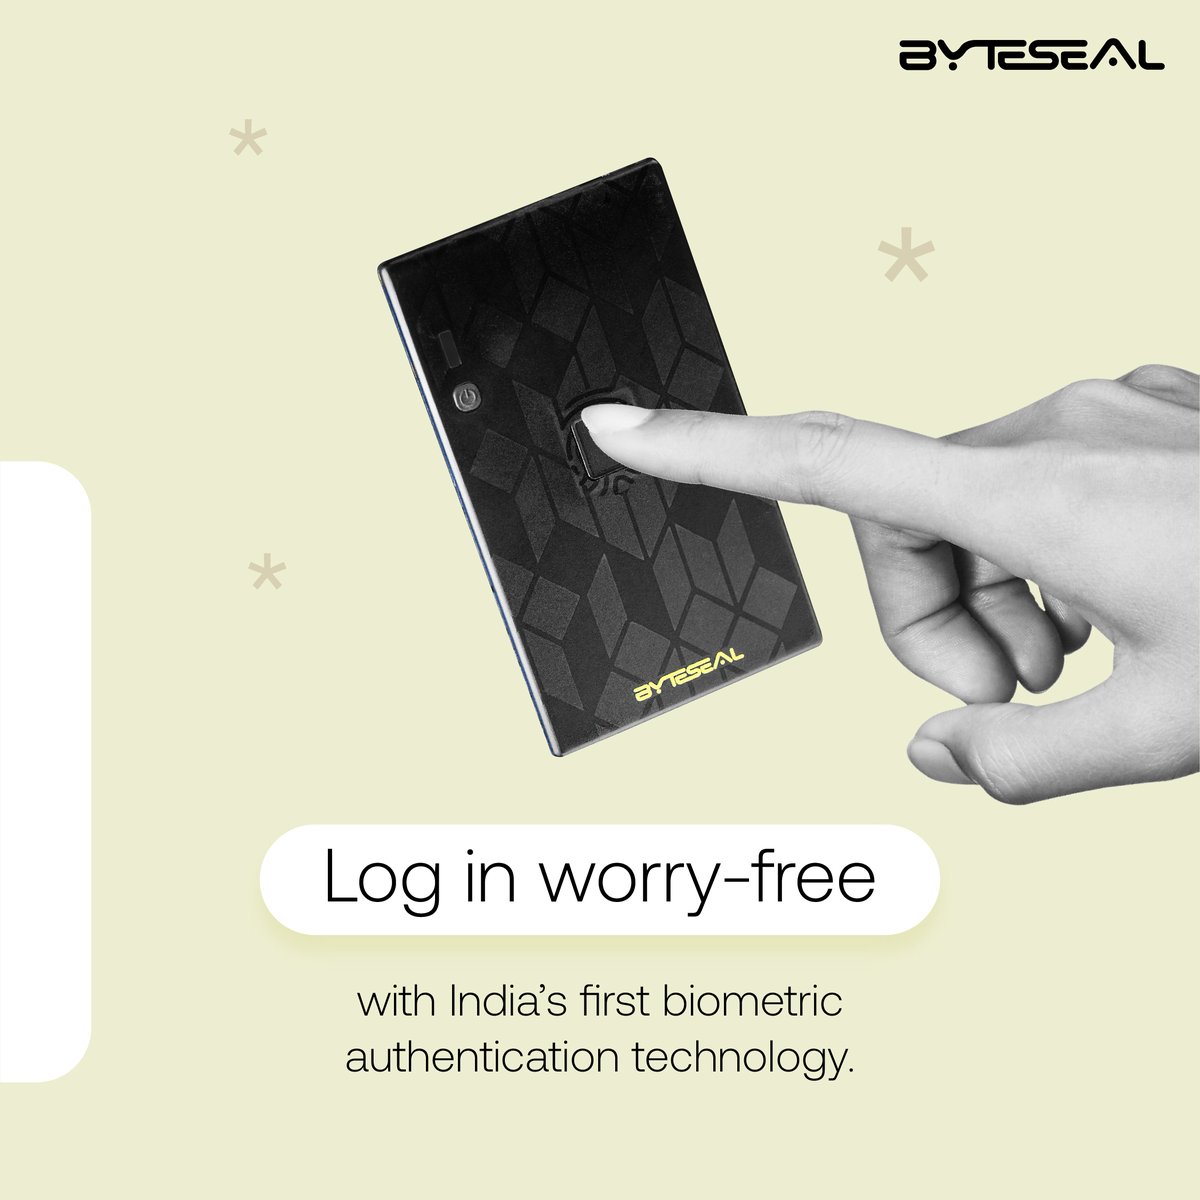 Working from a cafe?

Log in worry-free with India’s first biometric authentication technology.
Byteseal Biometric ID.

#byteseal #password #passwordmanager #freelance #wifi #hacking #socialsecurity #onlinesecurity #socialmedia #freelancer #techie #gadget #forgotpassword